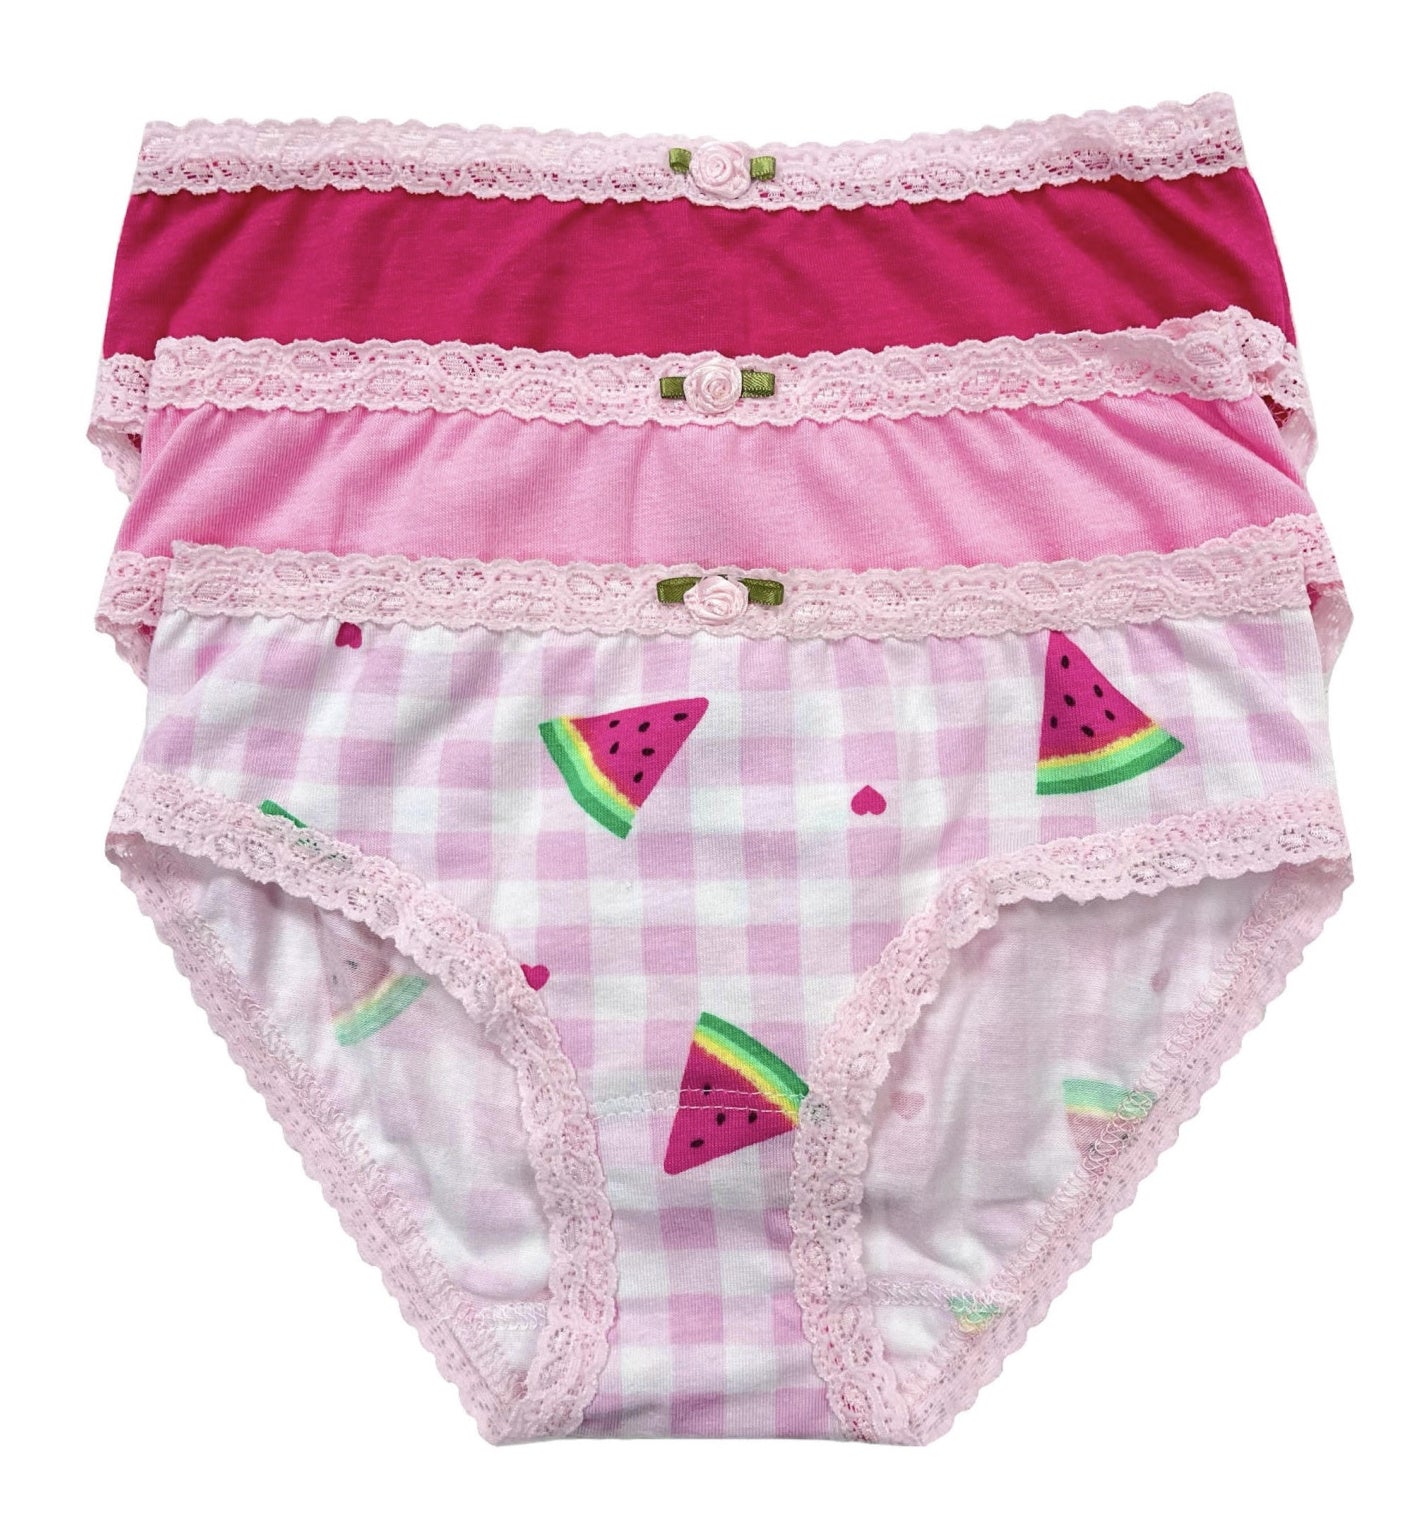 Three Islands Boxers in Pink Dots